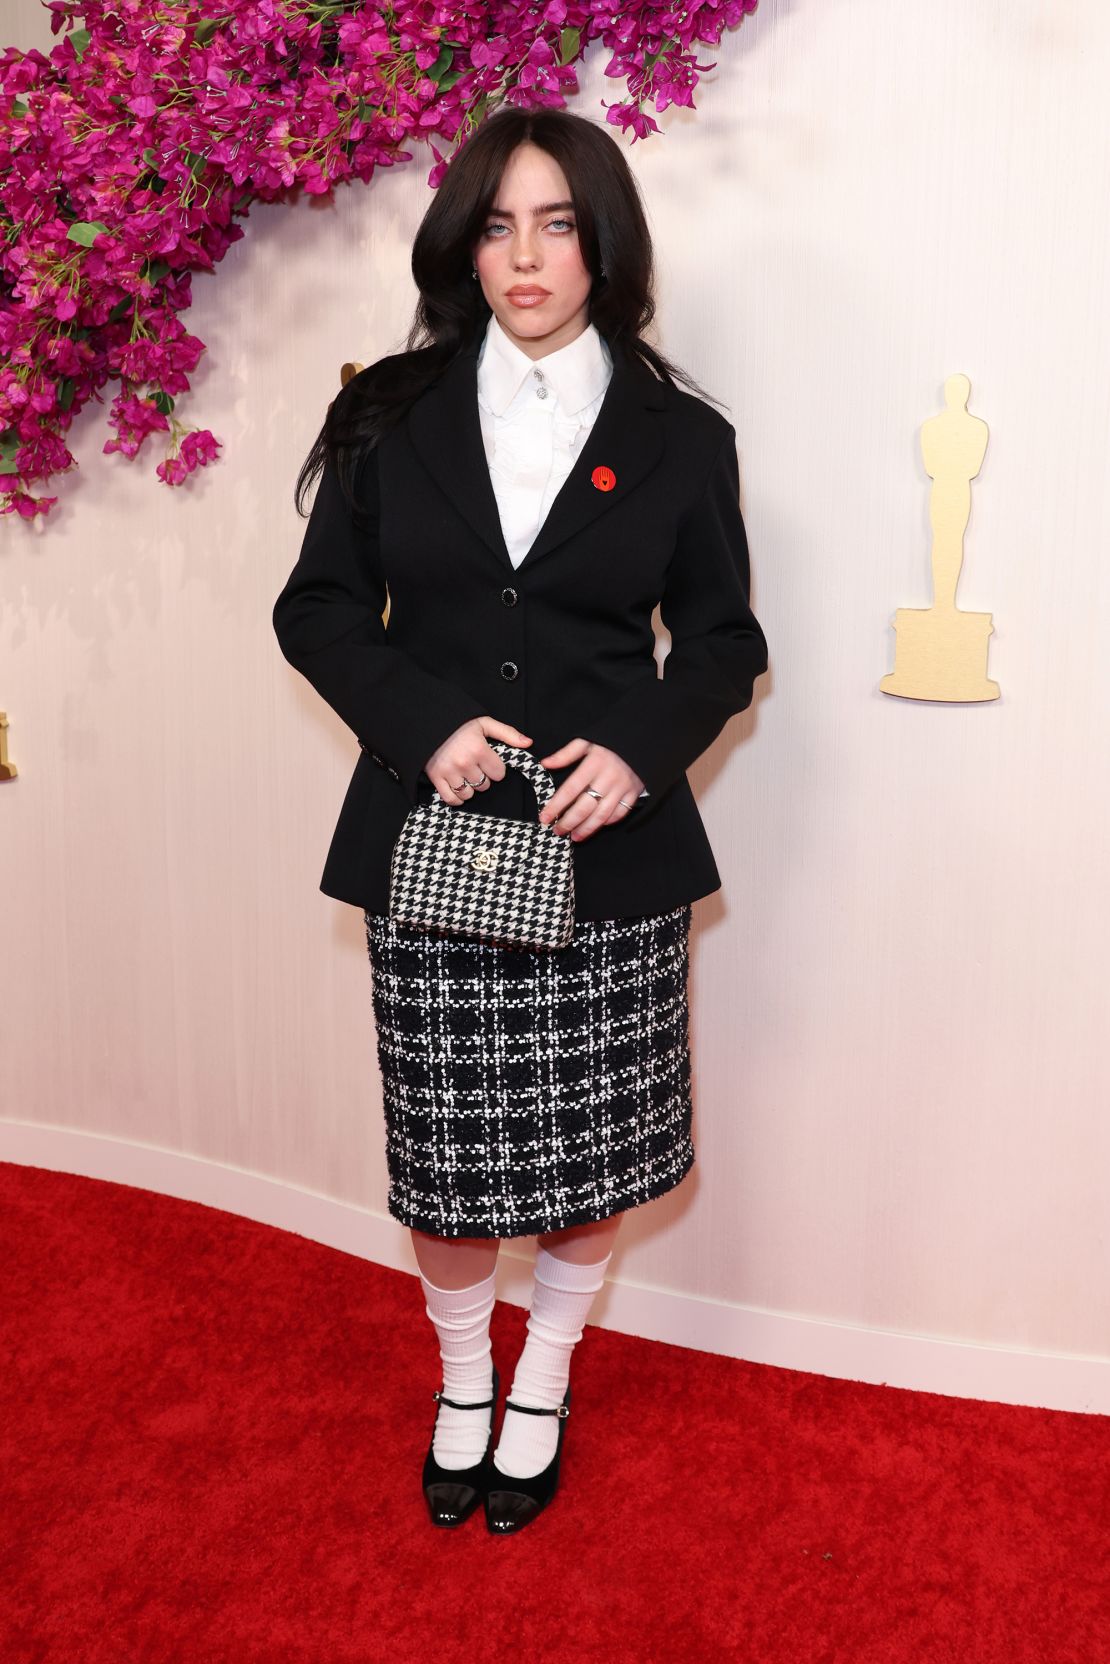 Billie Eilish, nominated for Best Original Song, arrived at the event in Chanel.